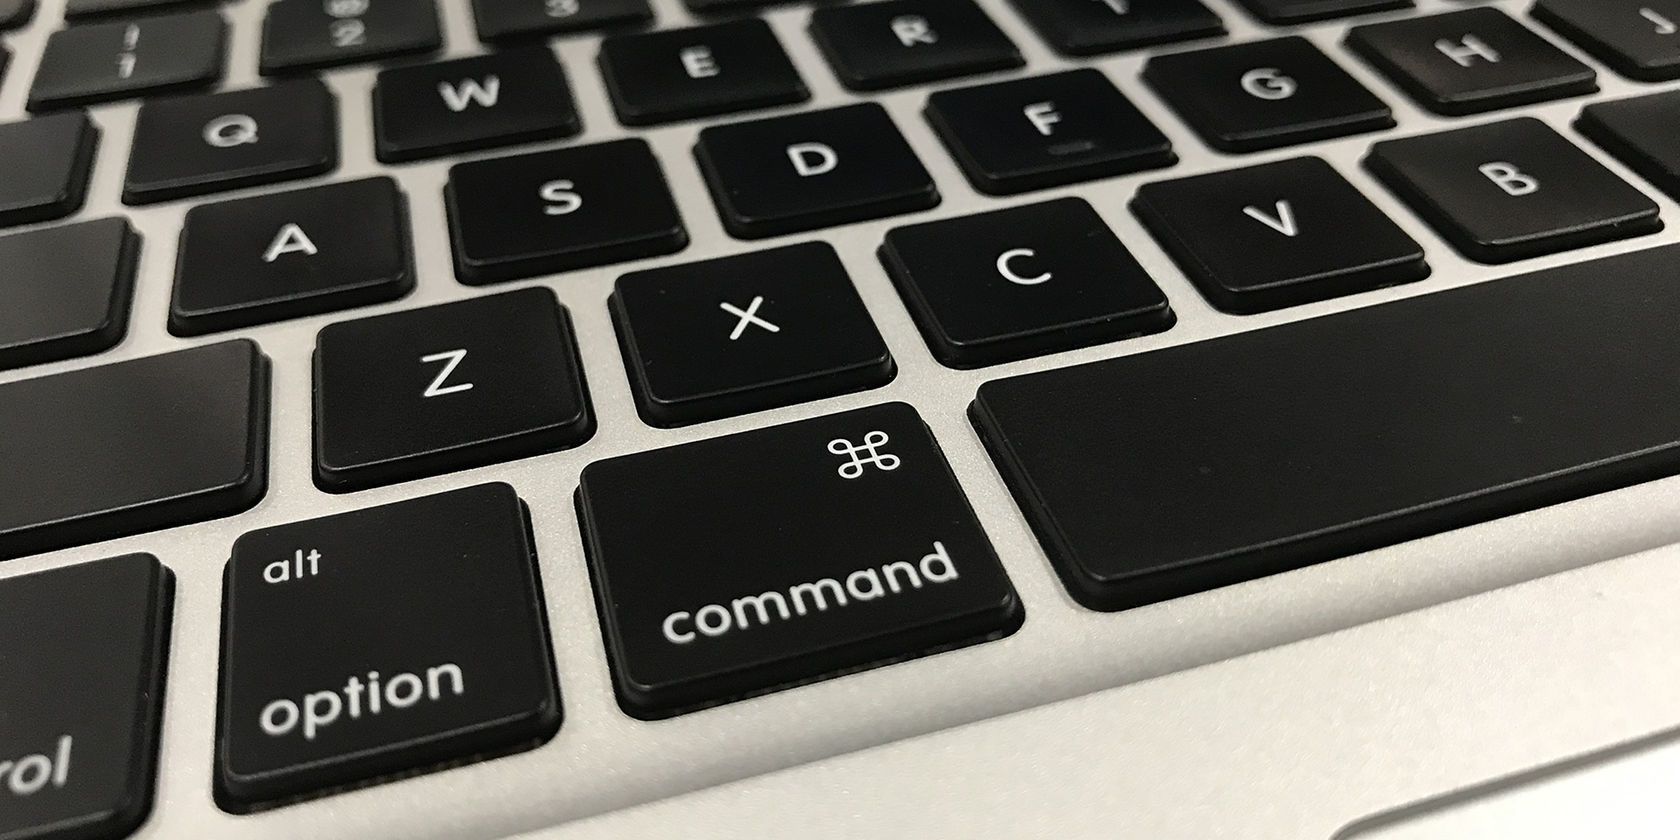 copy and paste keyboard mac